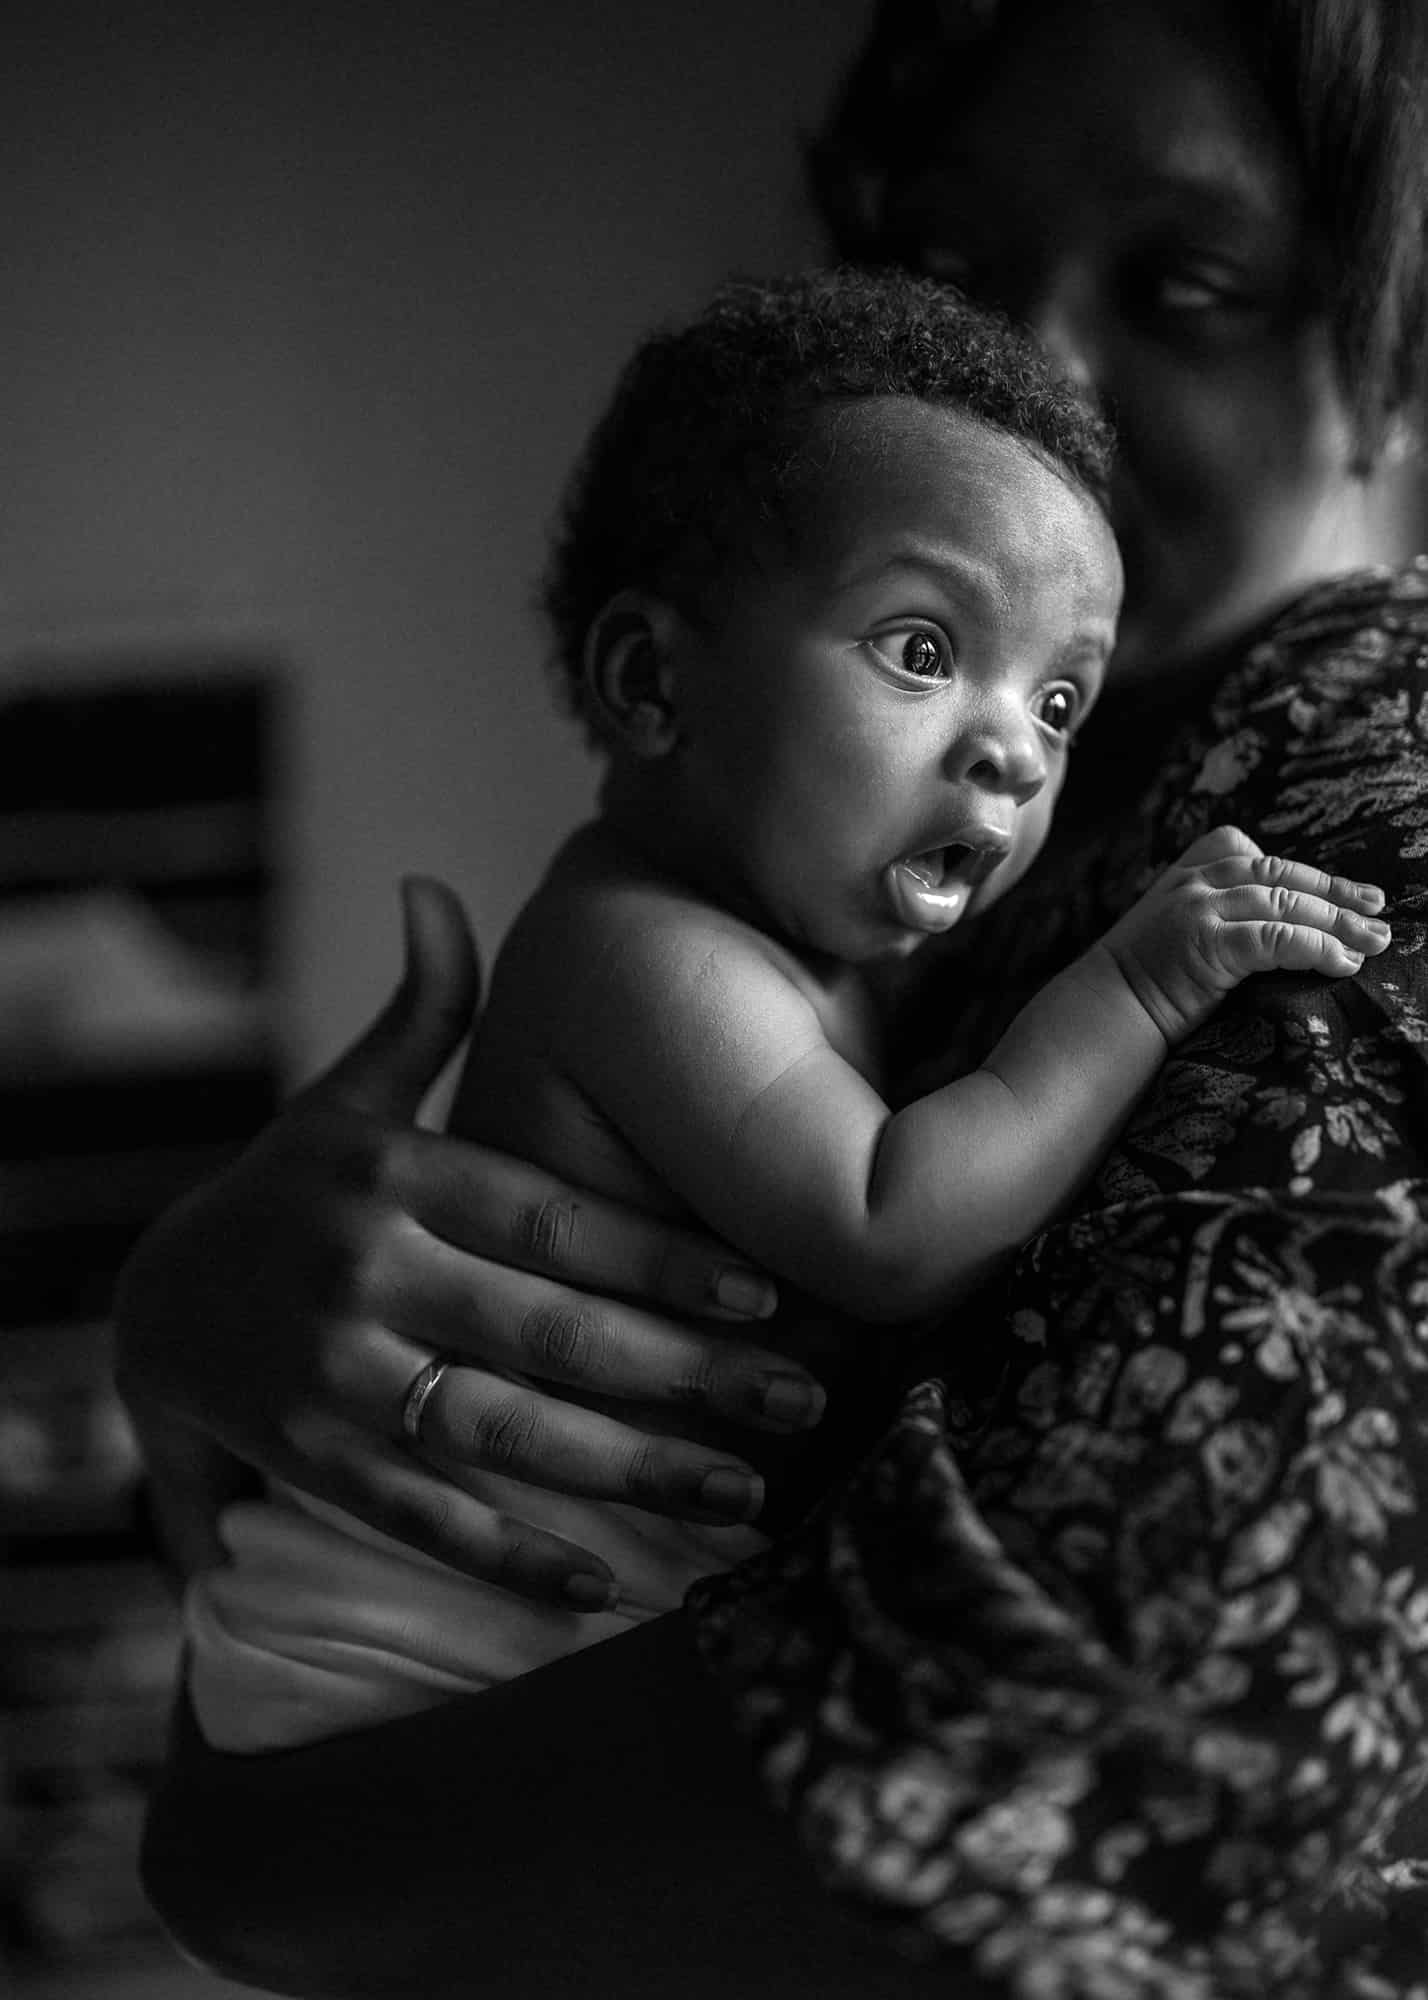 black and white newborn photographer orlando Florida - expressive baby looking out the window in his mom's arms